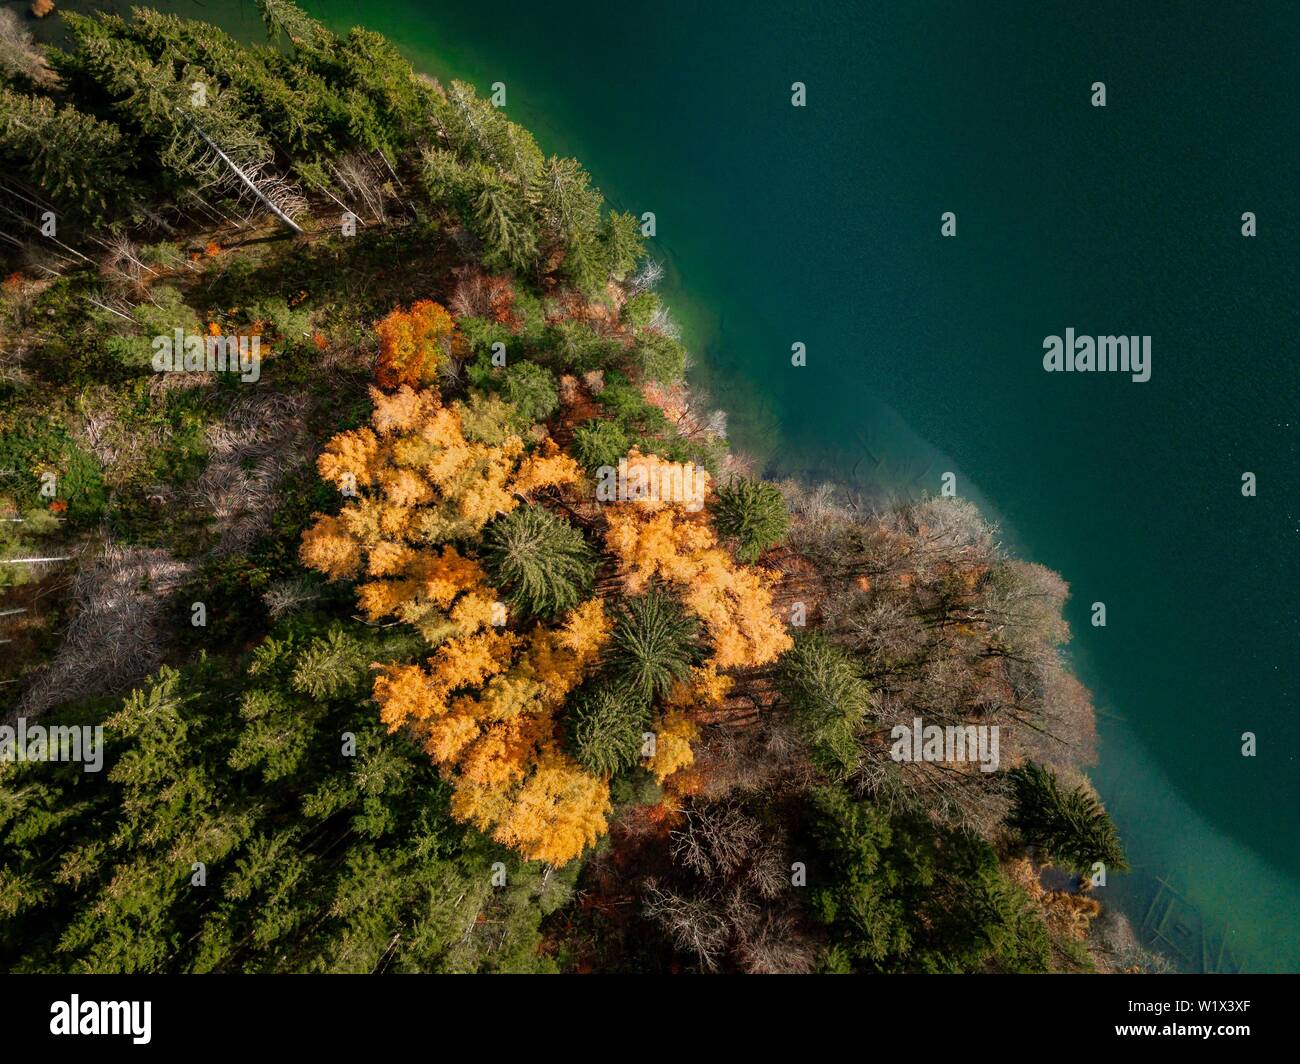 Drone shot, bird's eye view, mixed forest with yellow leaves in autumn from above, Lake Barmsee, Mittenwald, Bavaria, Germany Stock Photo